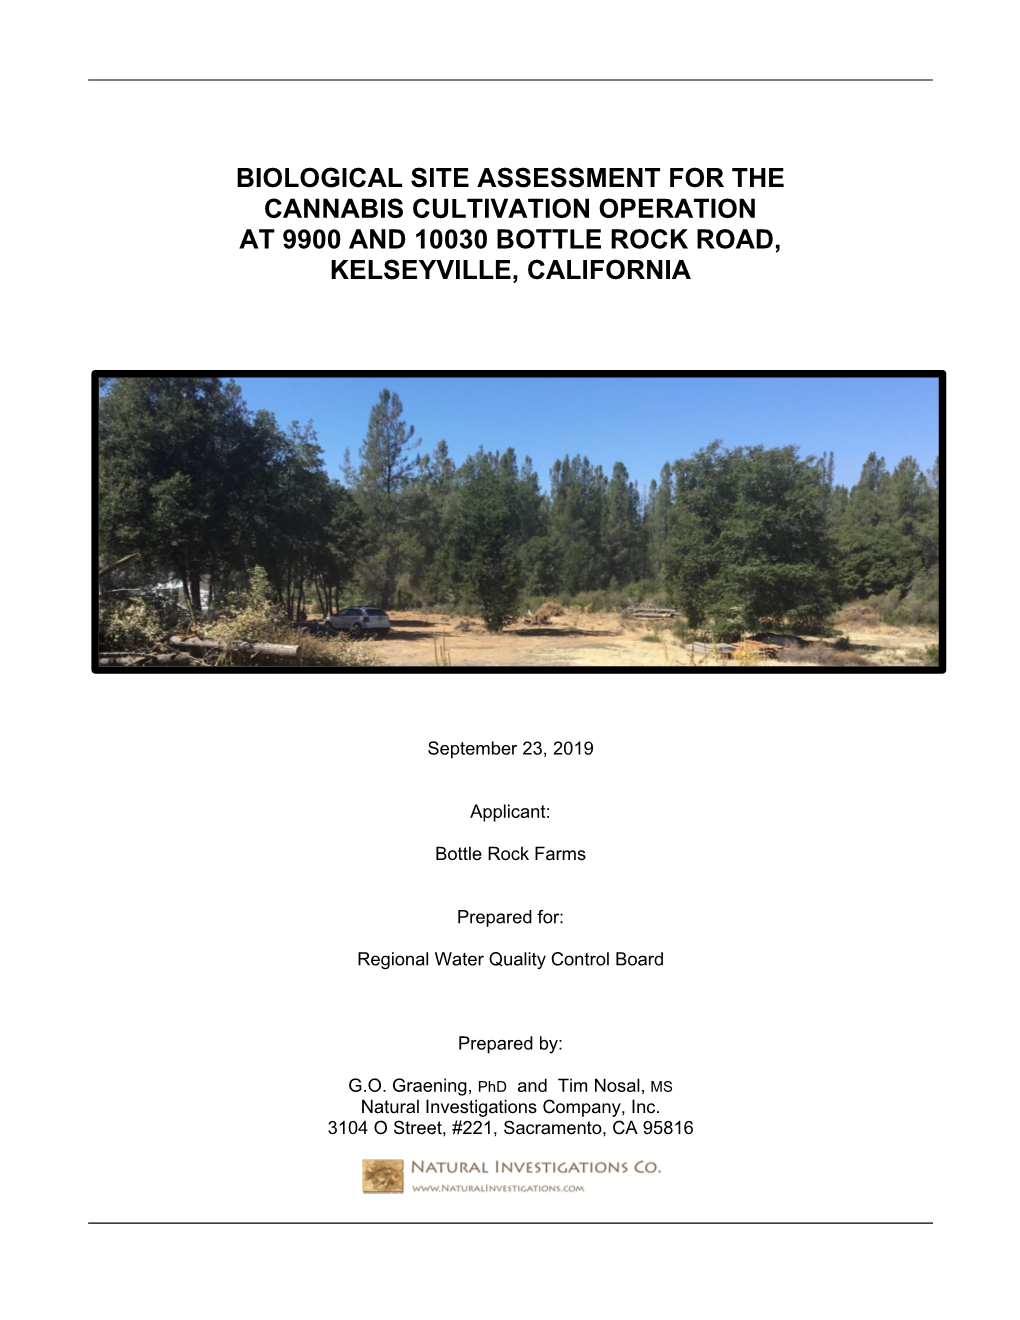 Biological Site Assessment for the Cannabis Cultivation Operation at 9900 and 10030 Bottle Rock Road, Kelseyville, California